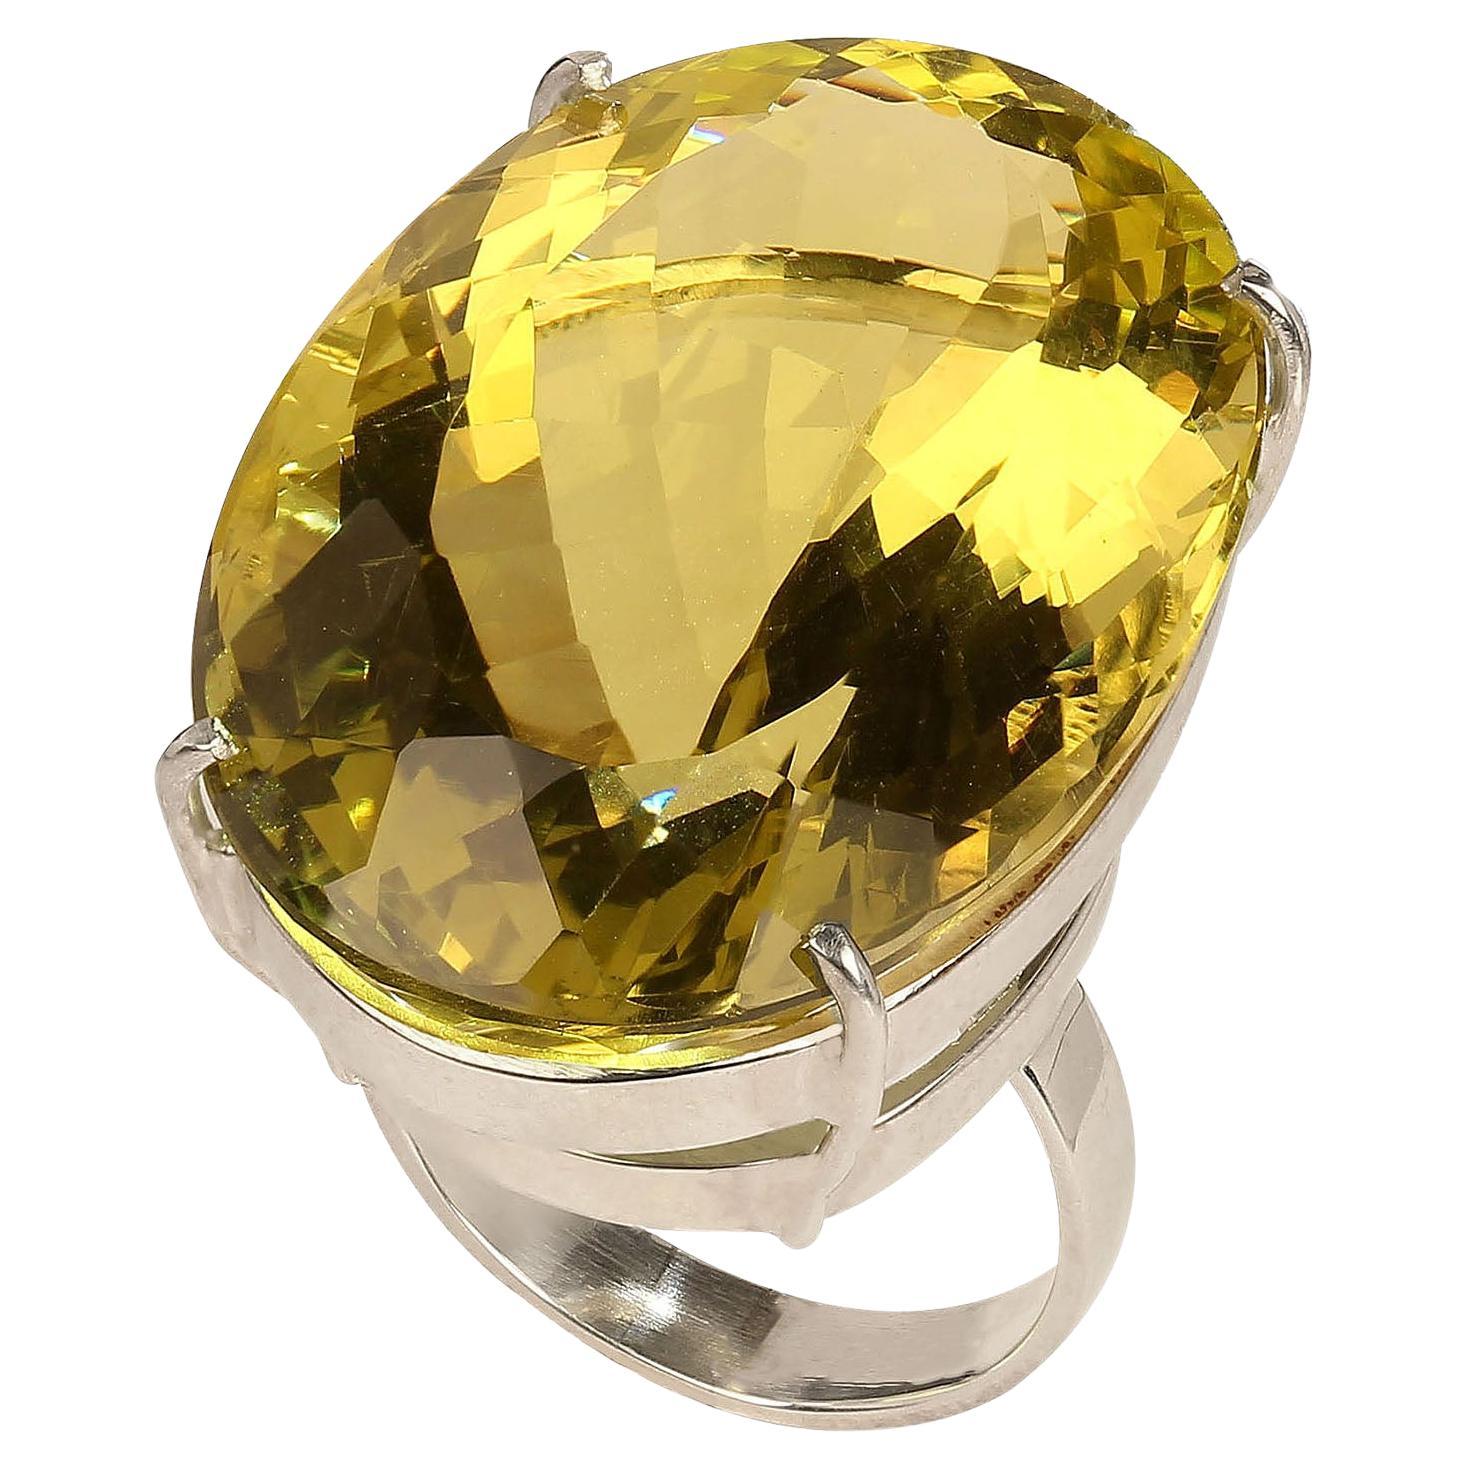 Magnificent 65 carat oval Lemon Quartz in Sterling Silver ring.  The huge ring is 34 X 23 MM making it truly knuckle to knuckle.  The gemcut  is so sparkly it is delight to wear.  This gorgeous Brazilian gem comes from one of our favorite suppliers